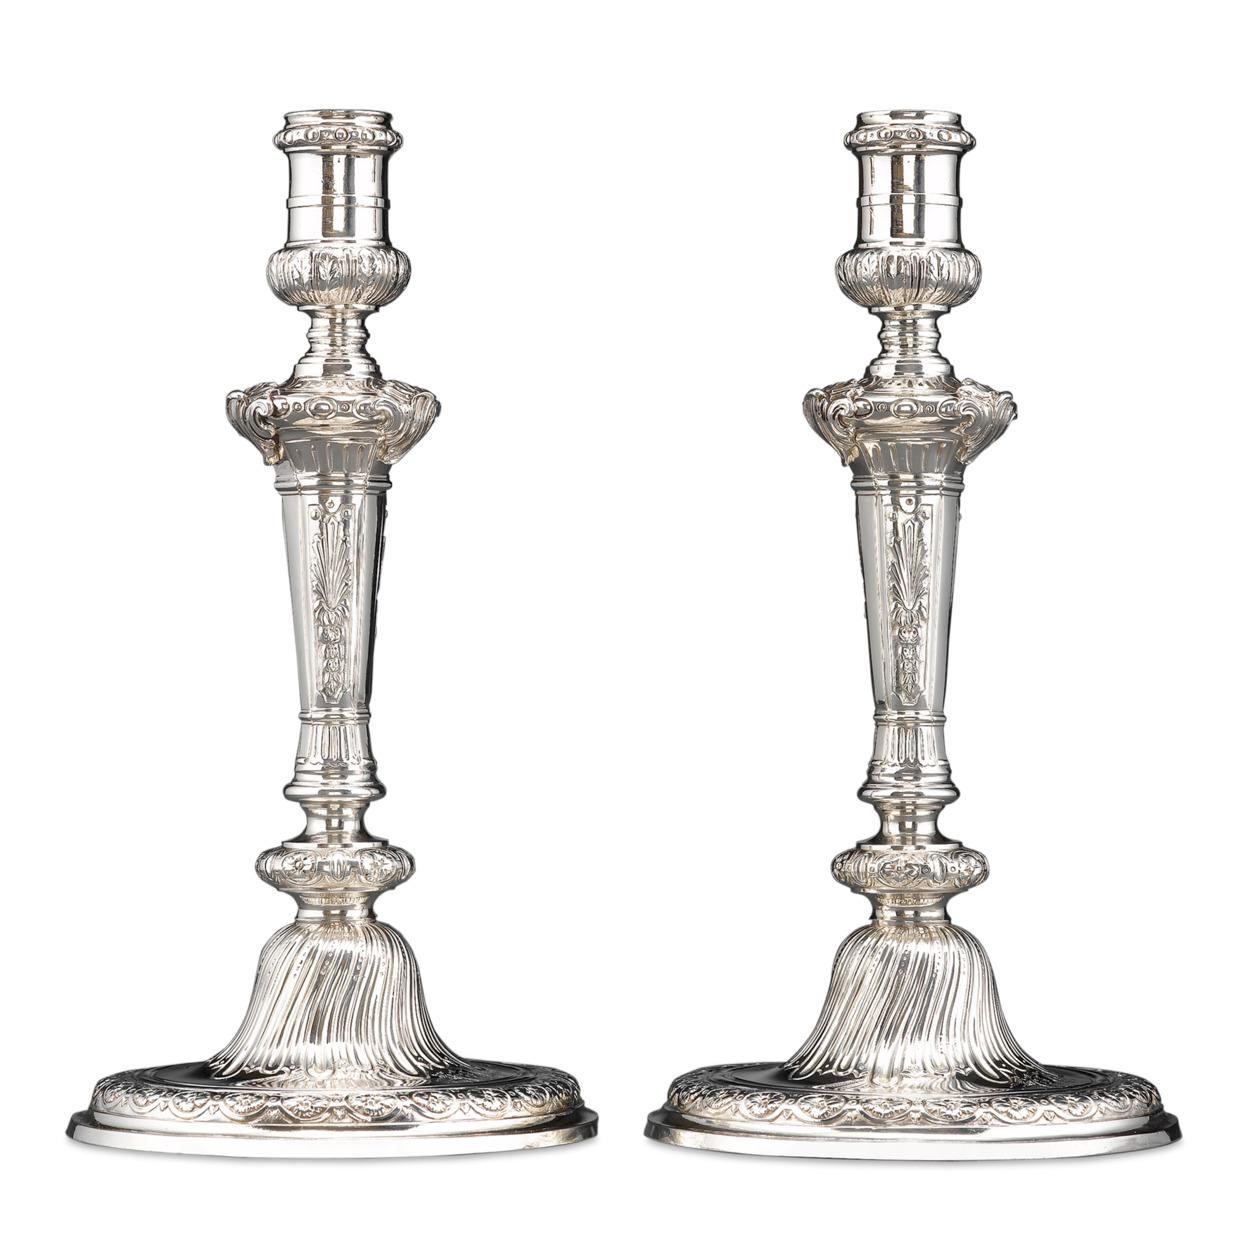 English Rococo Silver Candlesticks by Alexander Johnson For Sale